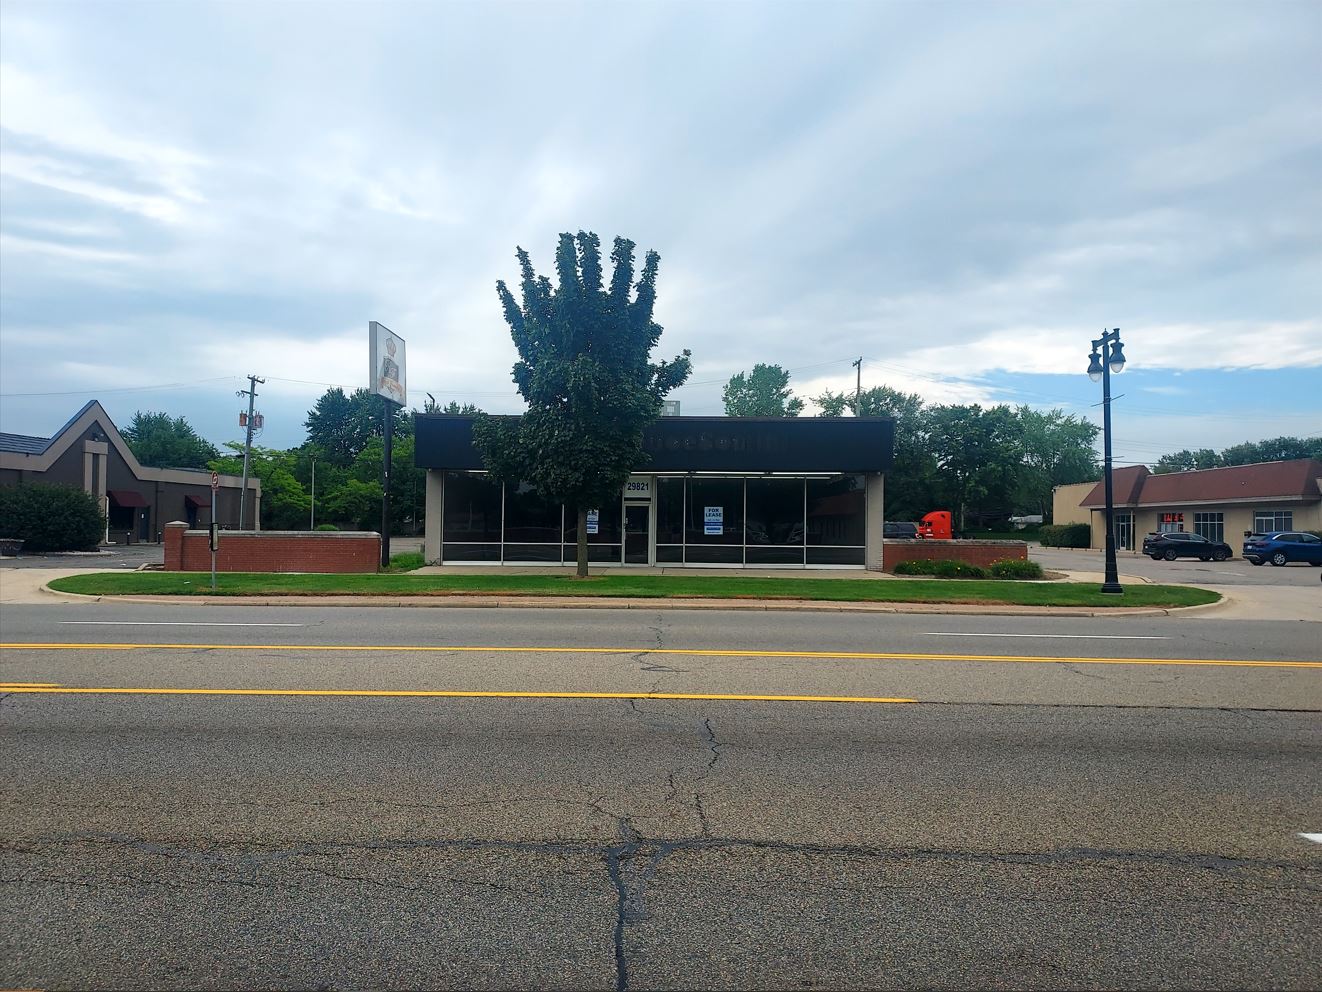 29821 Ford Rd., Garden City, Michigan 48135, ,Retail,For Lease,29821 Ford Rd.,1101